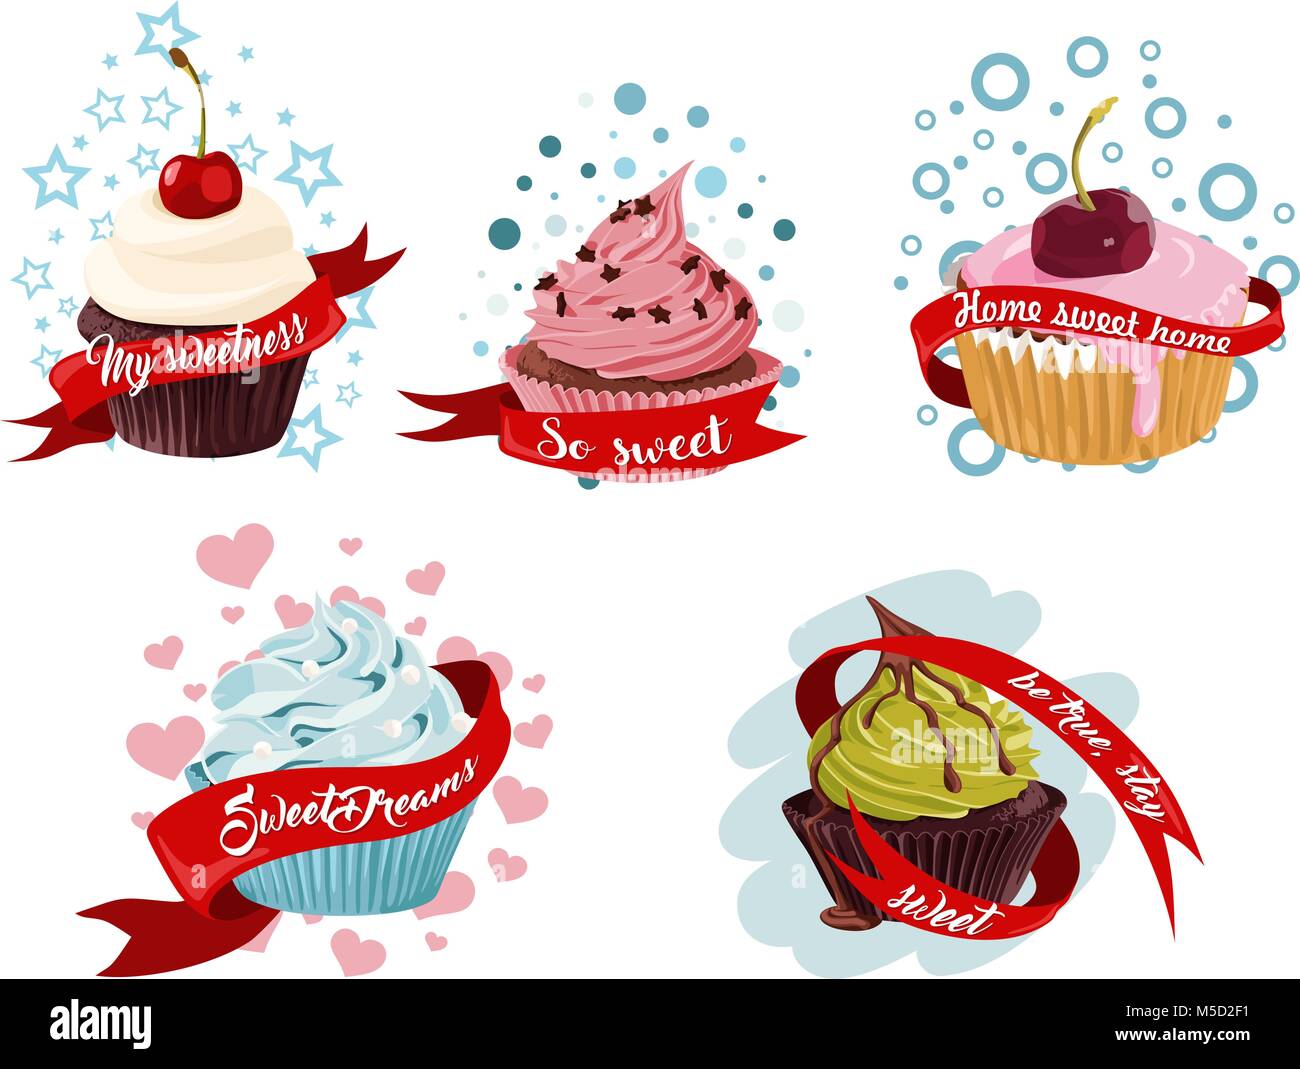 Sweet Cupcake vector ClipArt Set of 5 vector images of cupcakes with red ribbons for your creativity Stock Vector